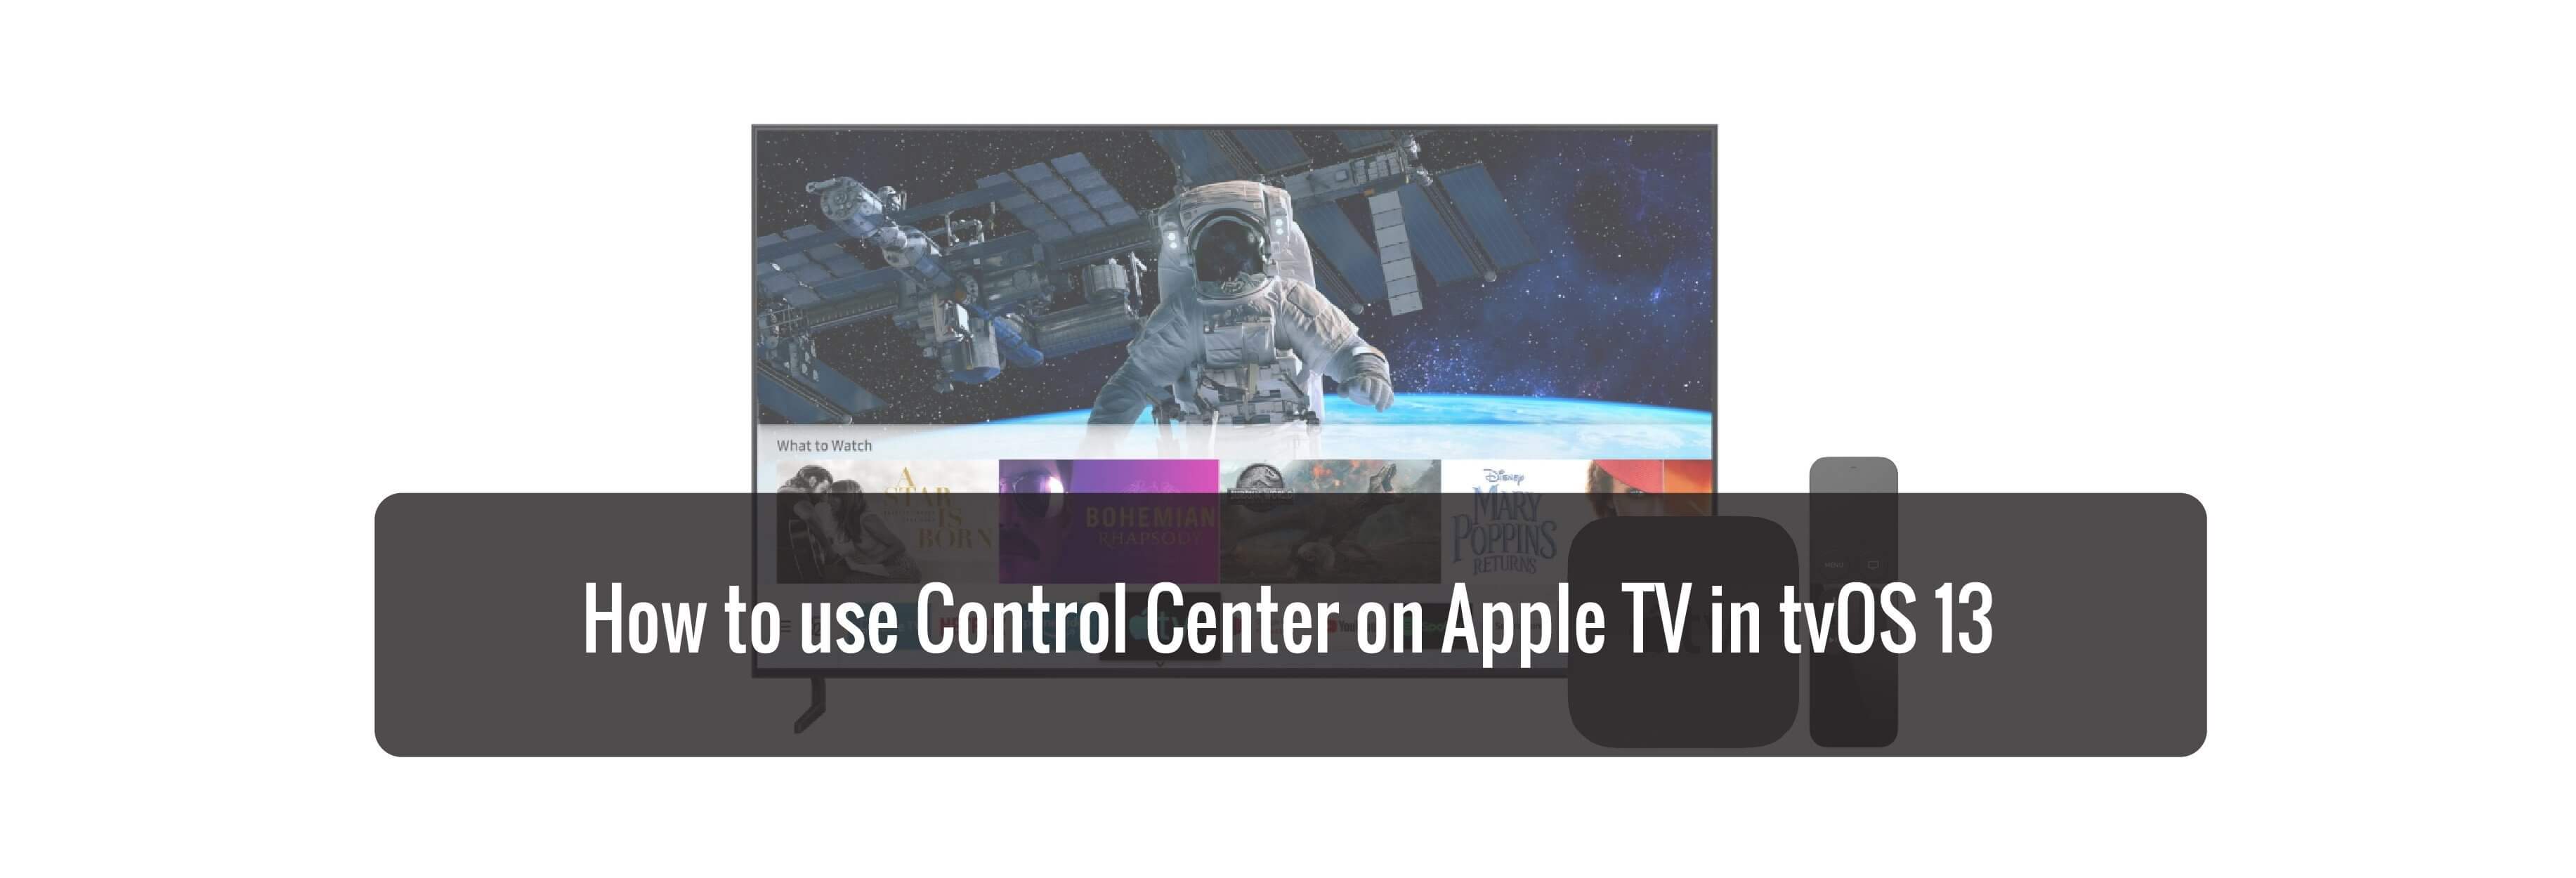 How to use Control Center on Apple TV in tvOS 13